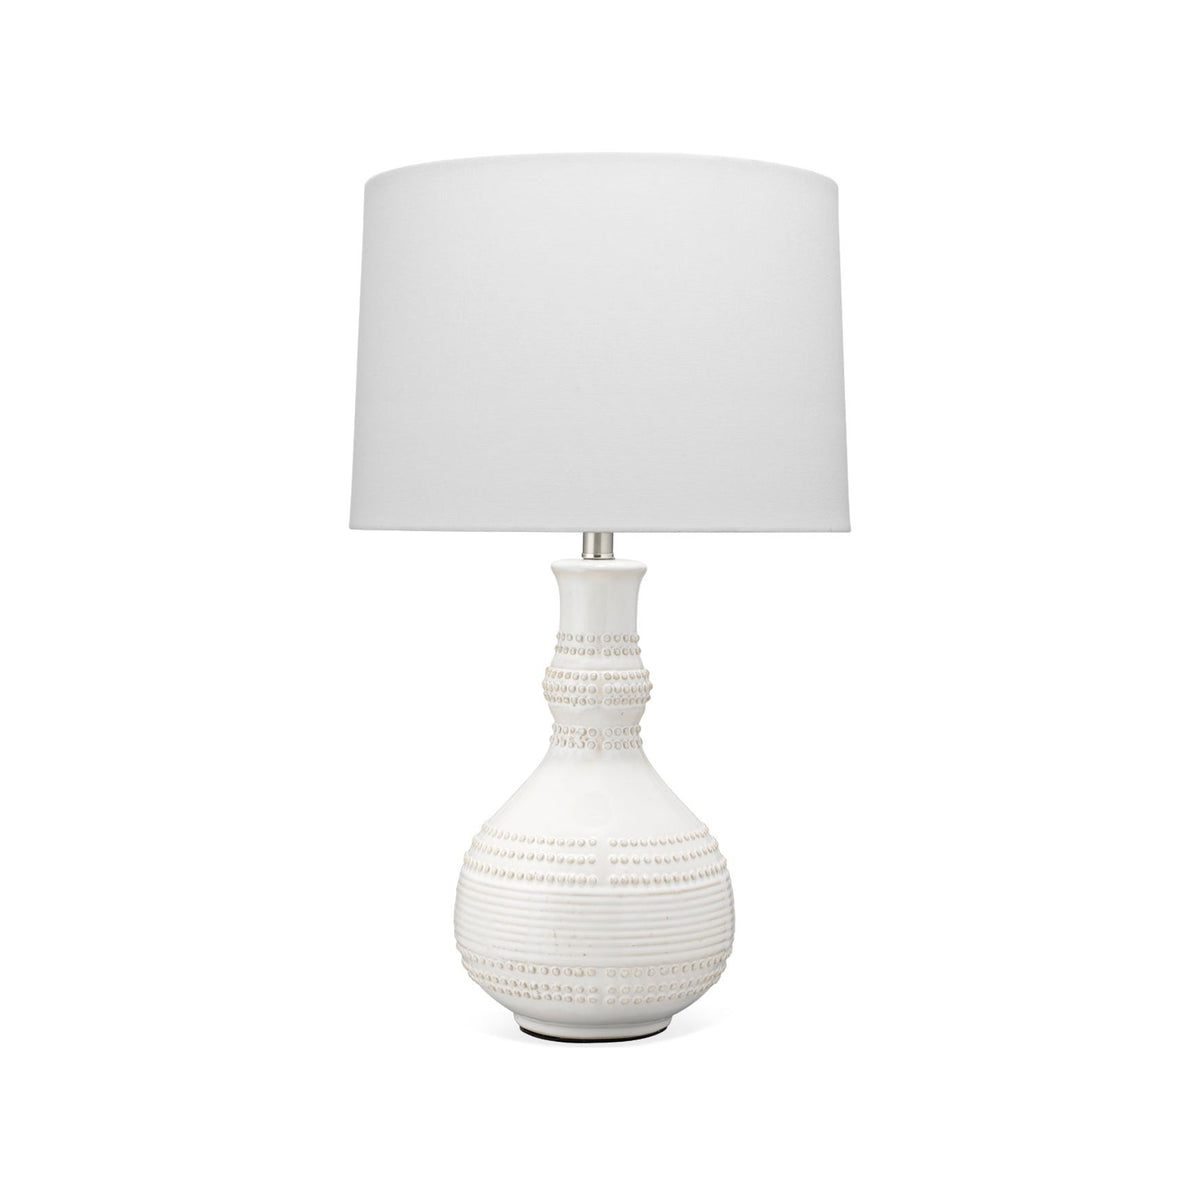 Jamie Young Company - LS9DROPLETWH - Droplet - Droplet Table Lamp - White